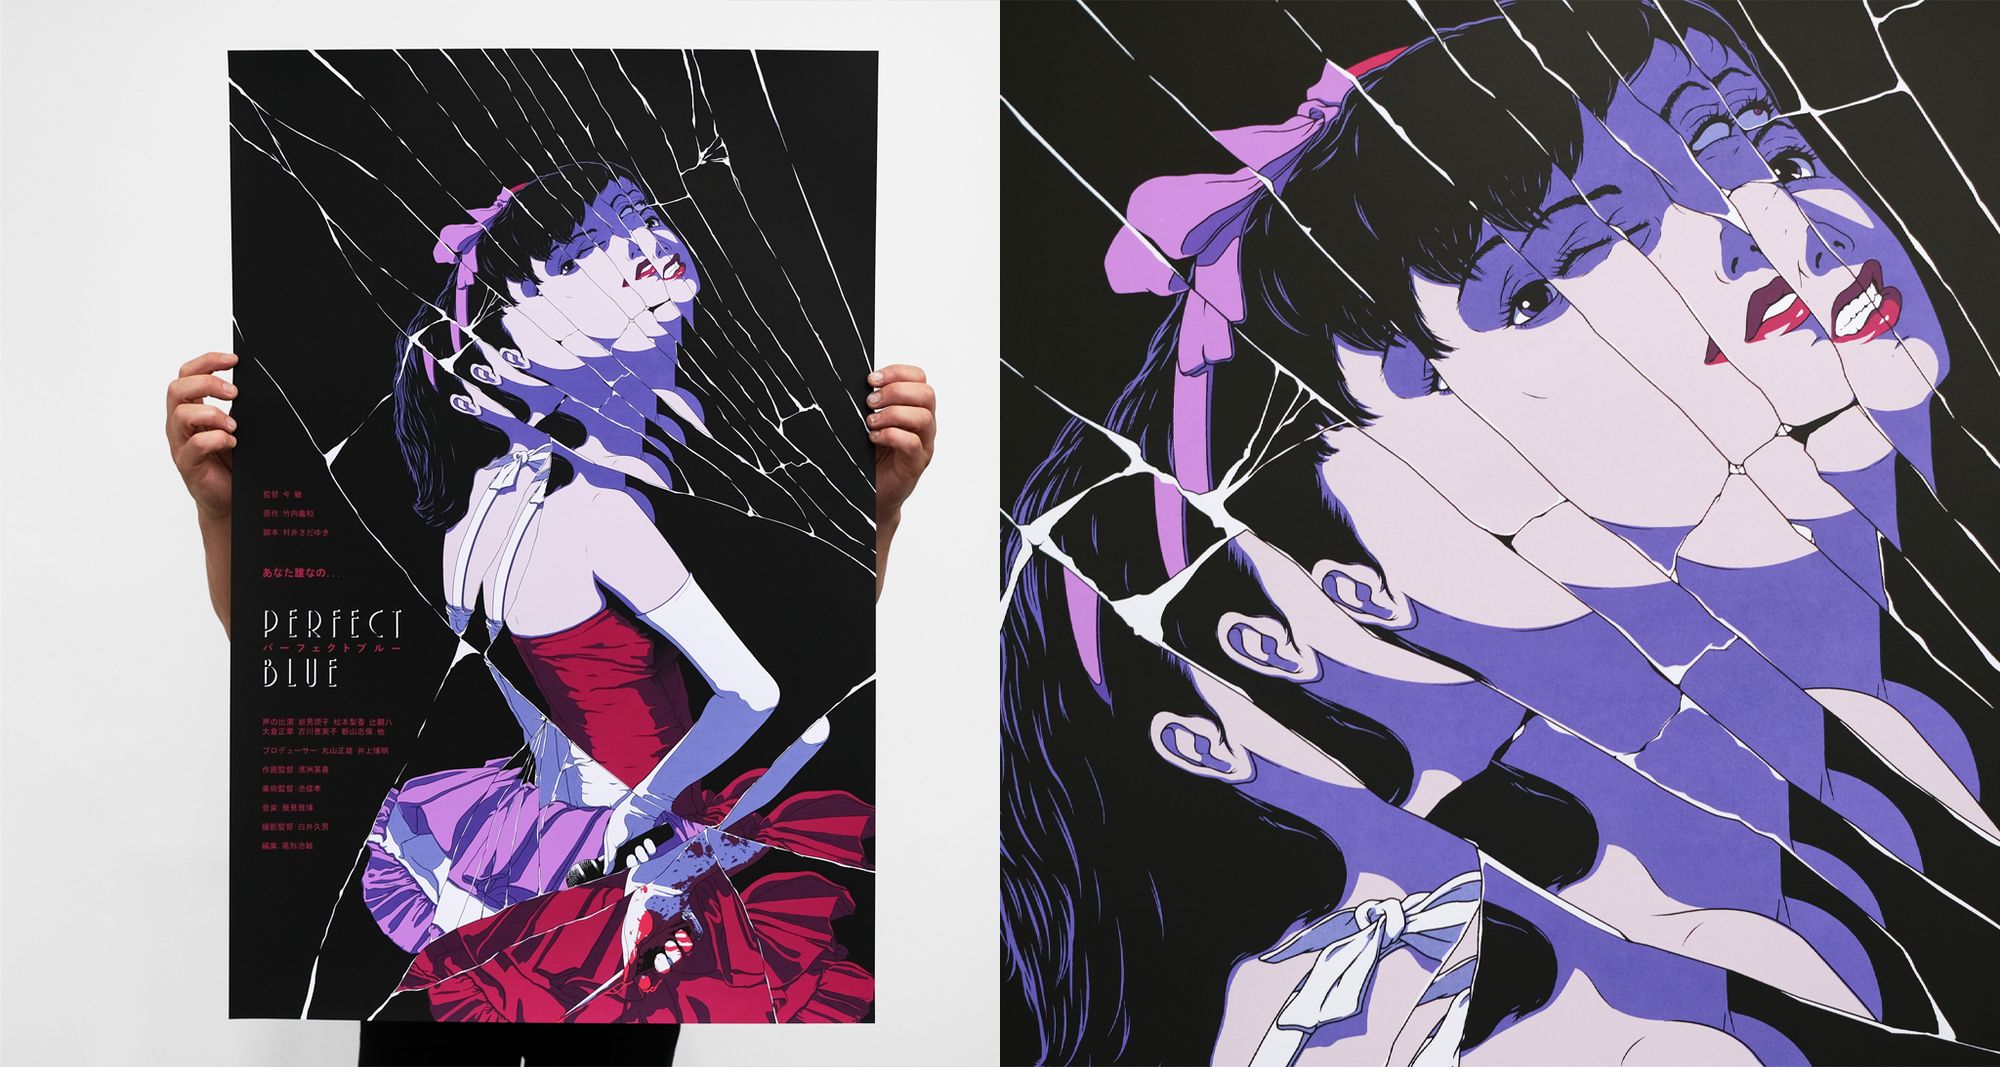 Perfect Blue' screenprint edition by Ethan Sharp.